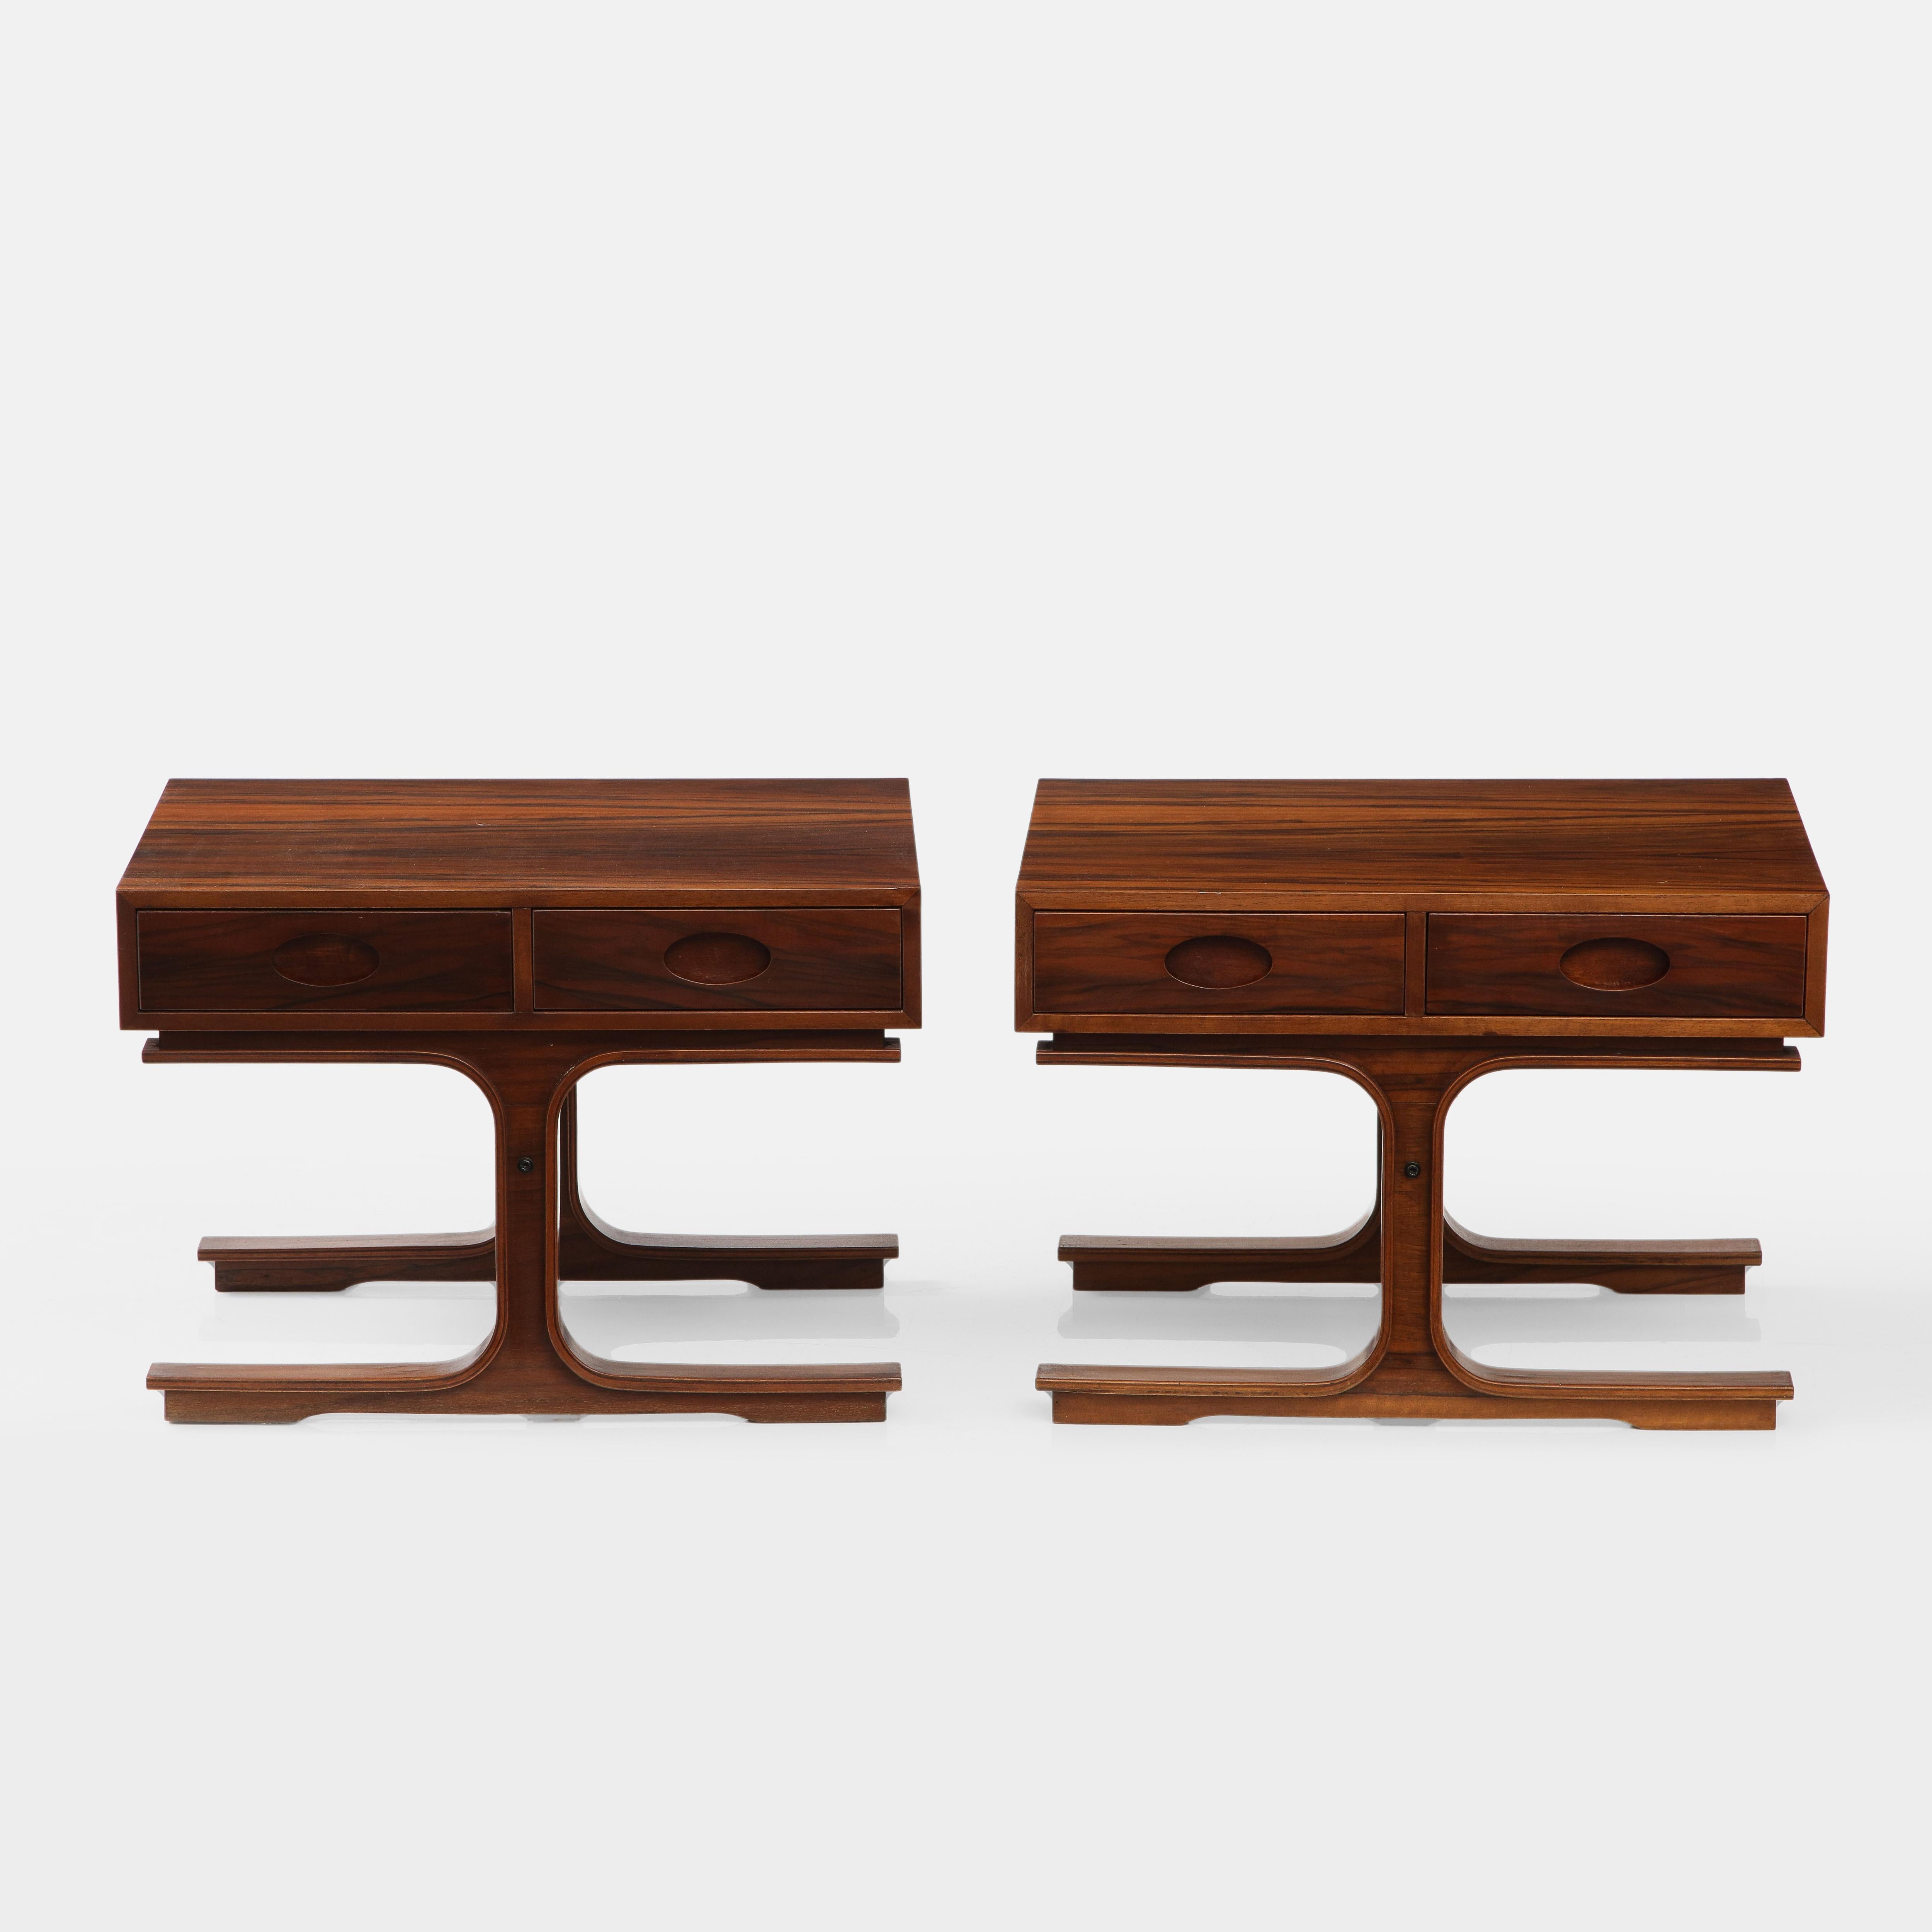 Gianfranco Frattini for Bernini modernist pair of side or bedside tables model 554 in rosewood each with two drawers and central front and back legs. These chic architectural tables have typical Bernini design elements including cutout oval drawer